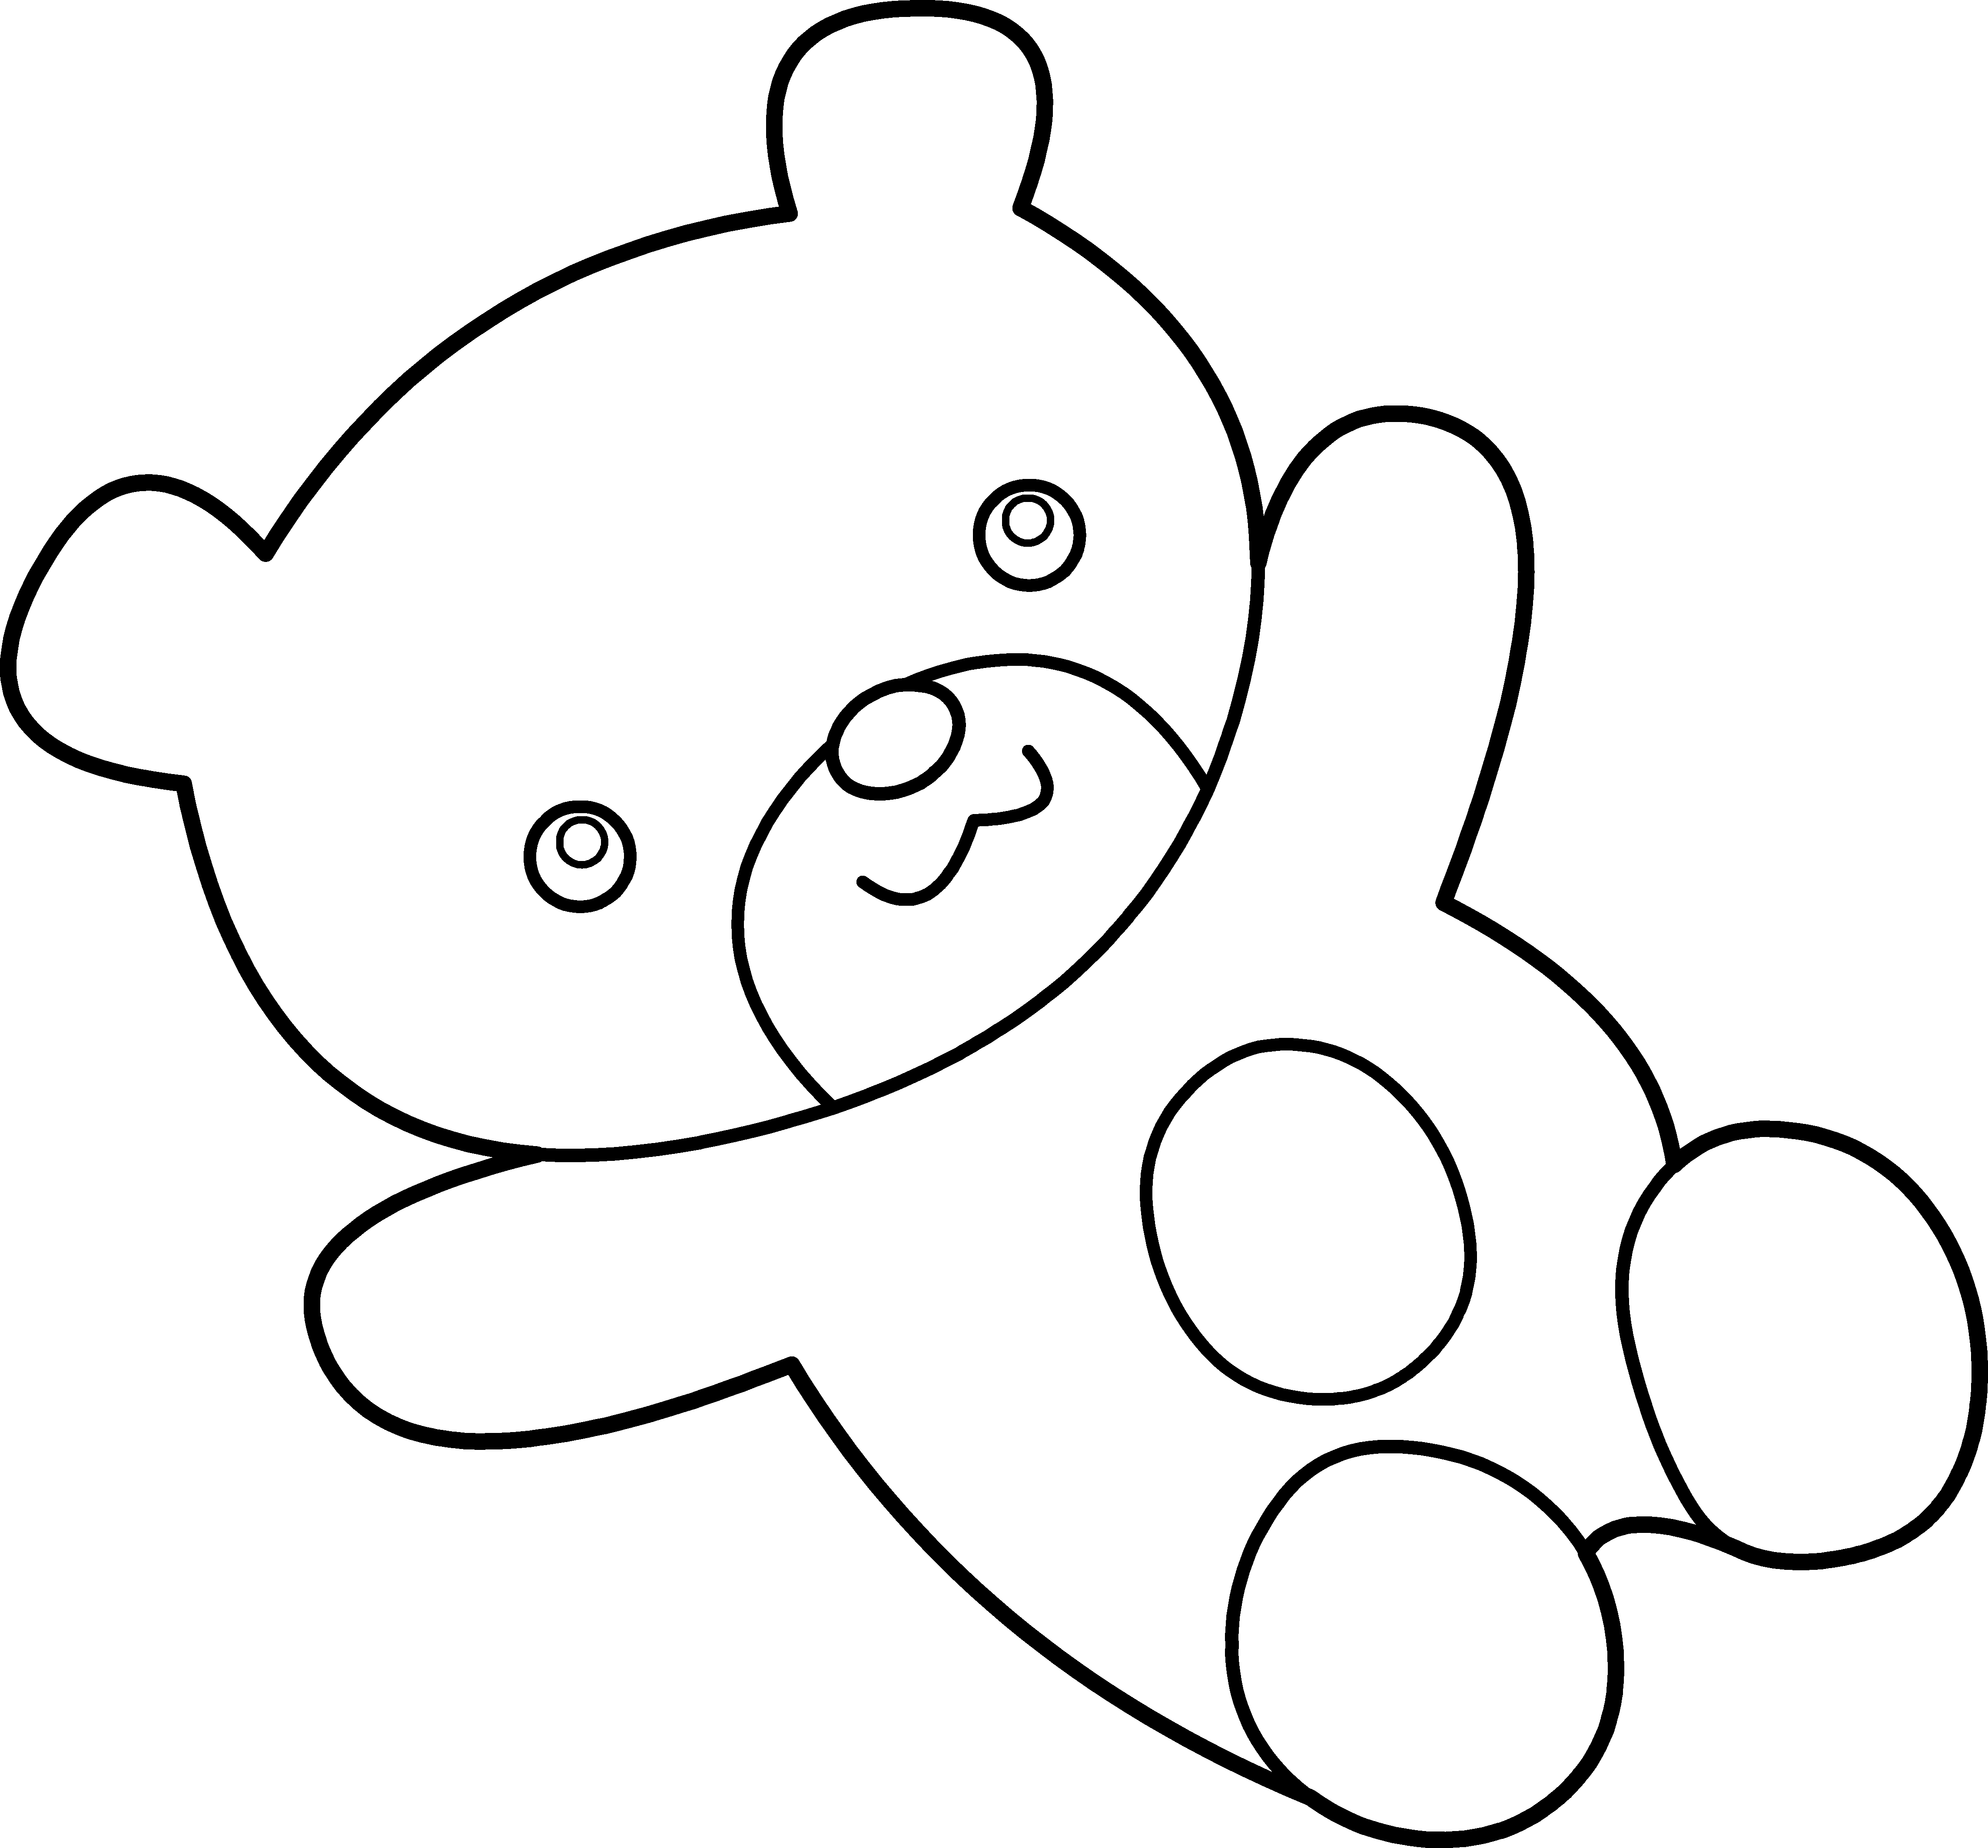 Cuddly Teddy Bear Coloring Page Free Clip Art